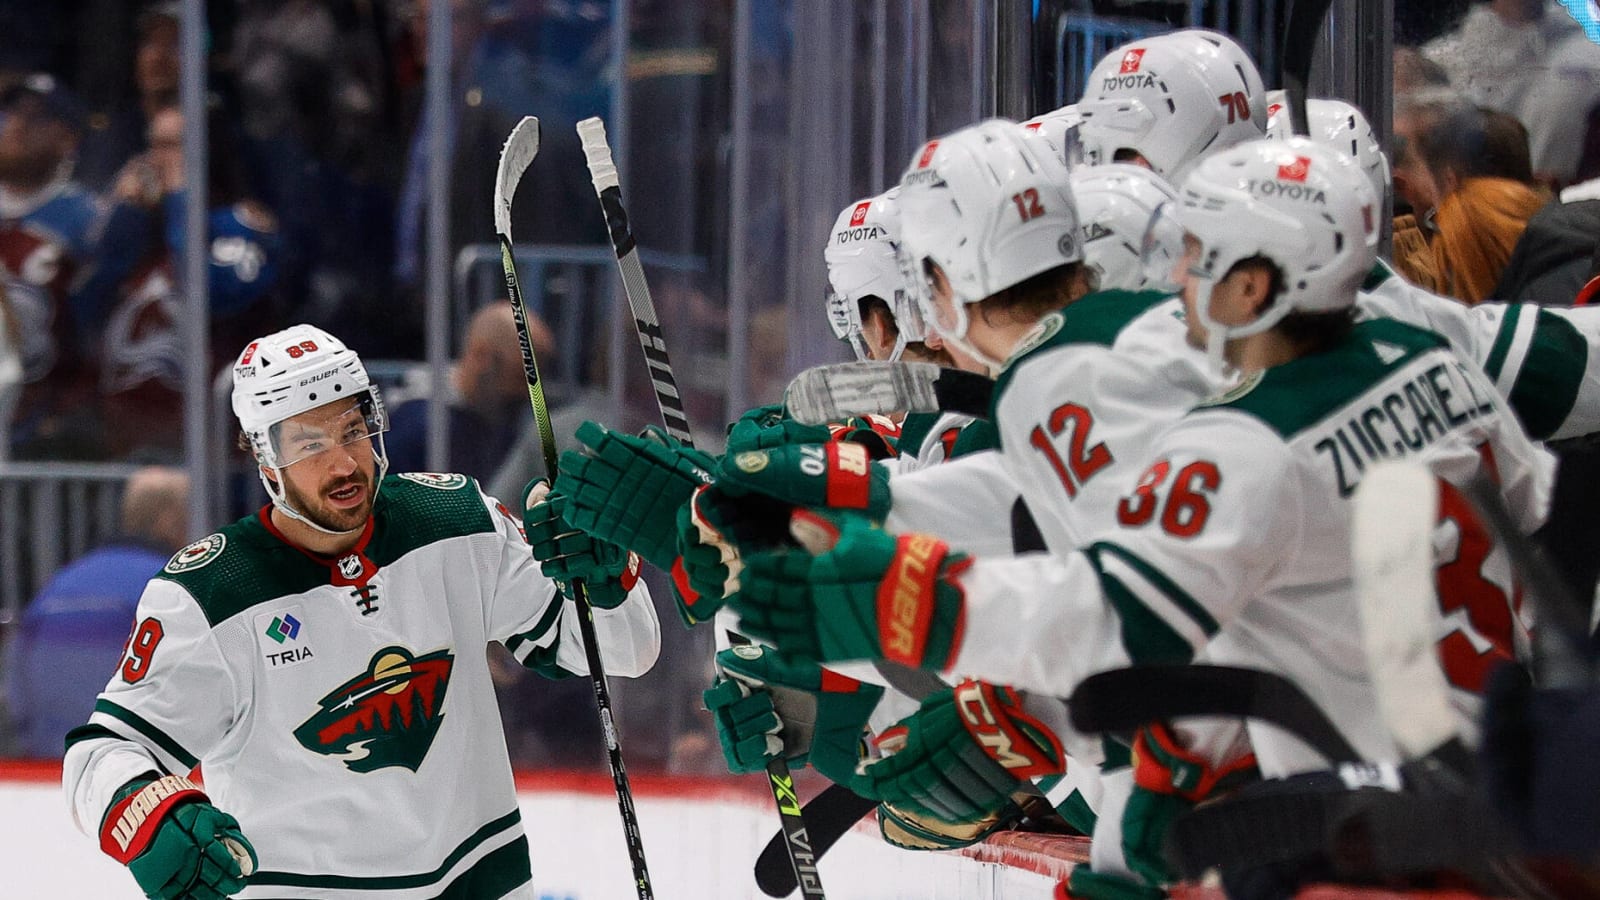 Have the surging Wild gone from bubble team to Cup contender?